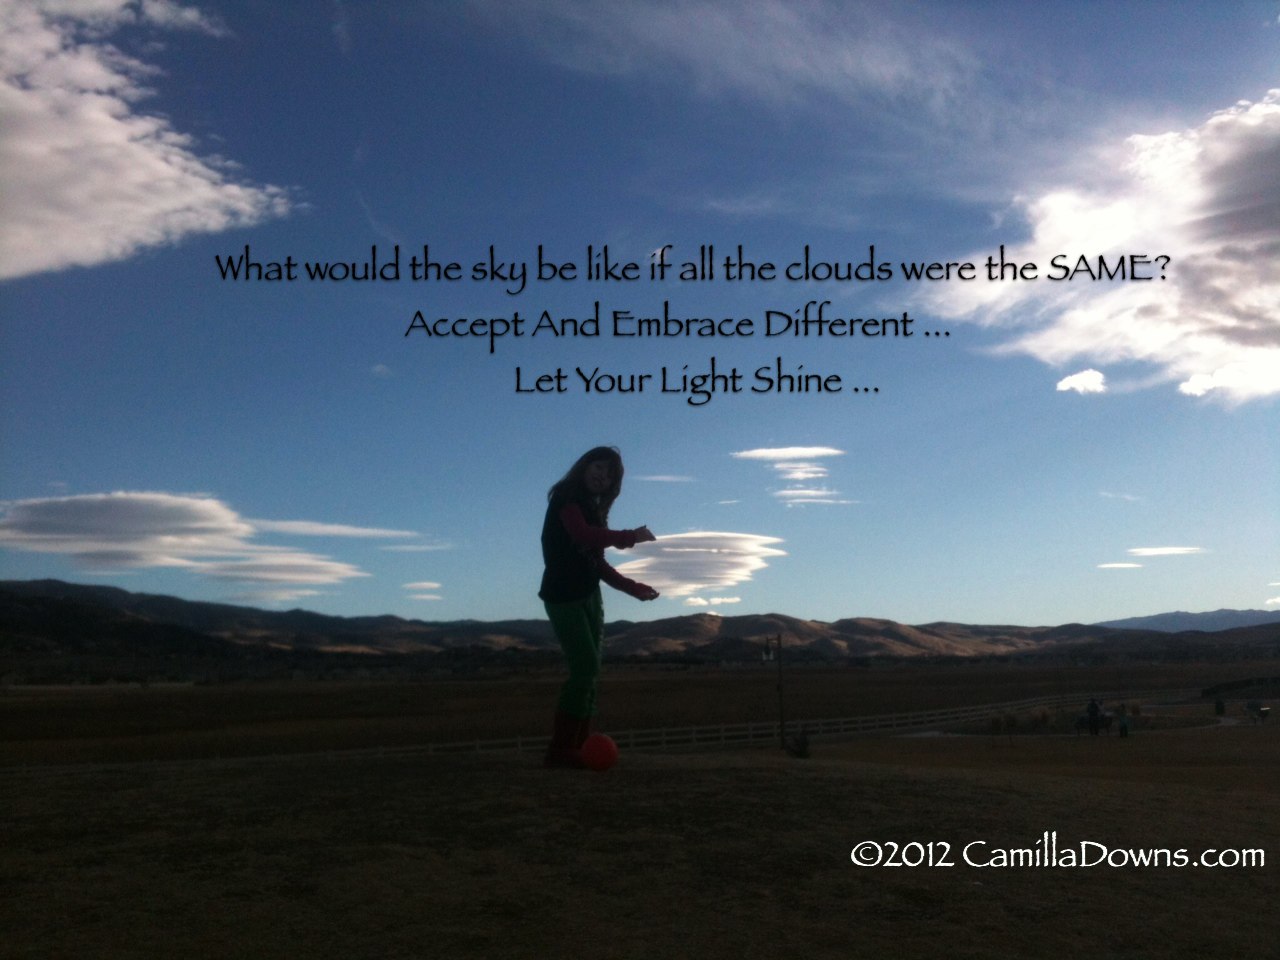 Change Acceptance And Embracing Differences